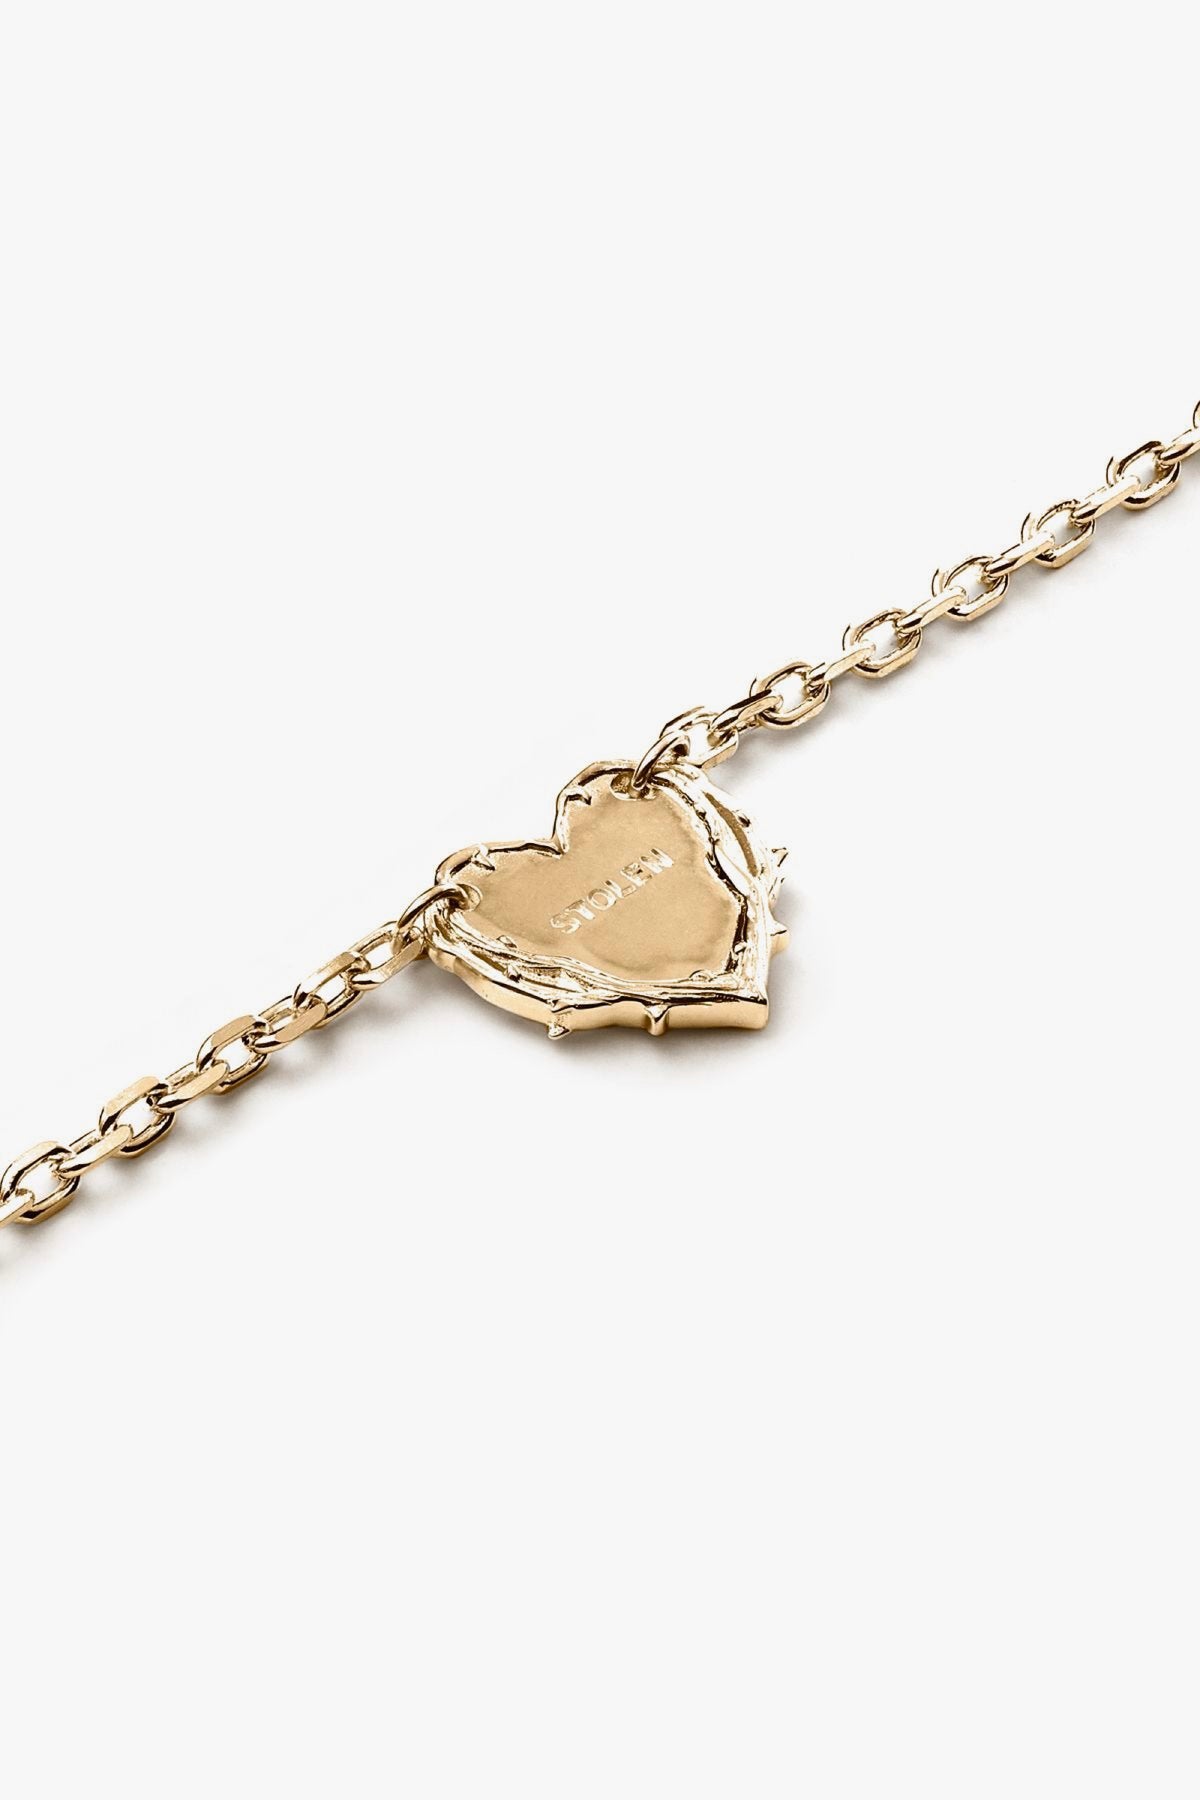 THORNED HEART NECKLACE - 18KT GOLD PLATED